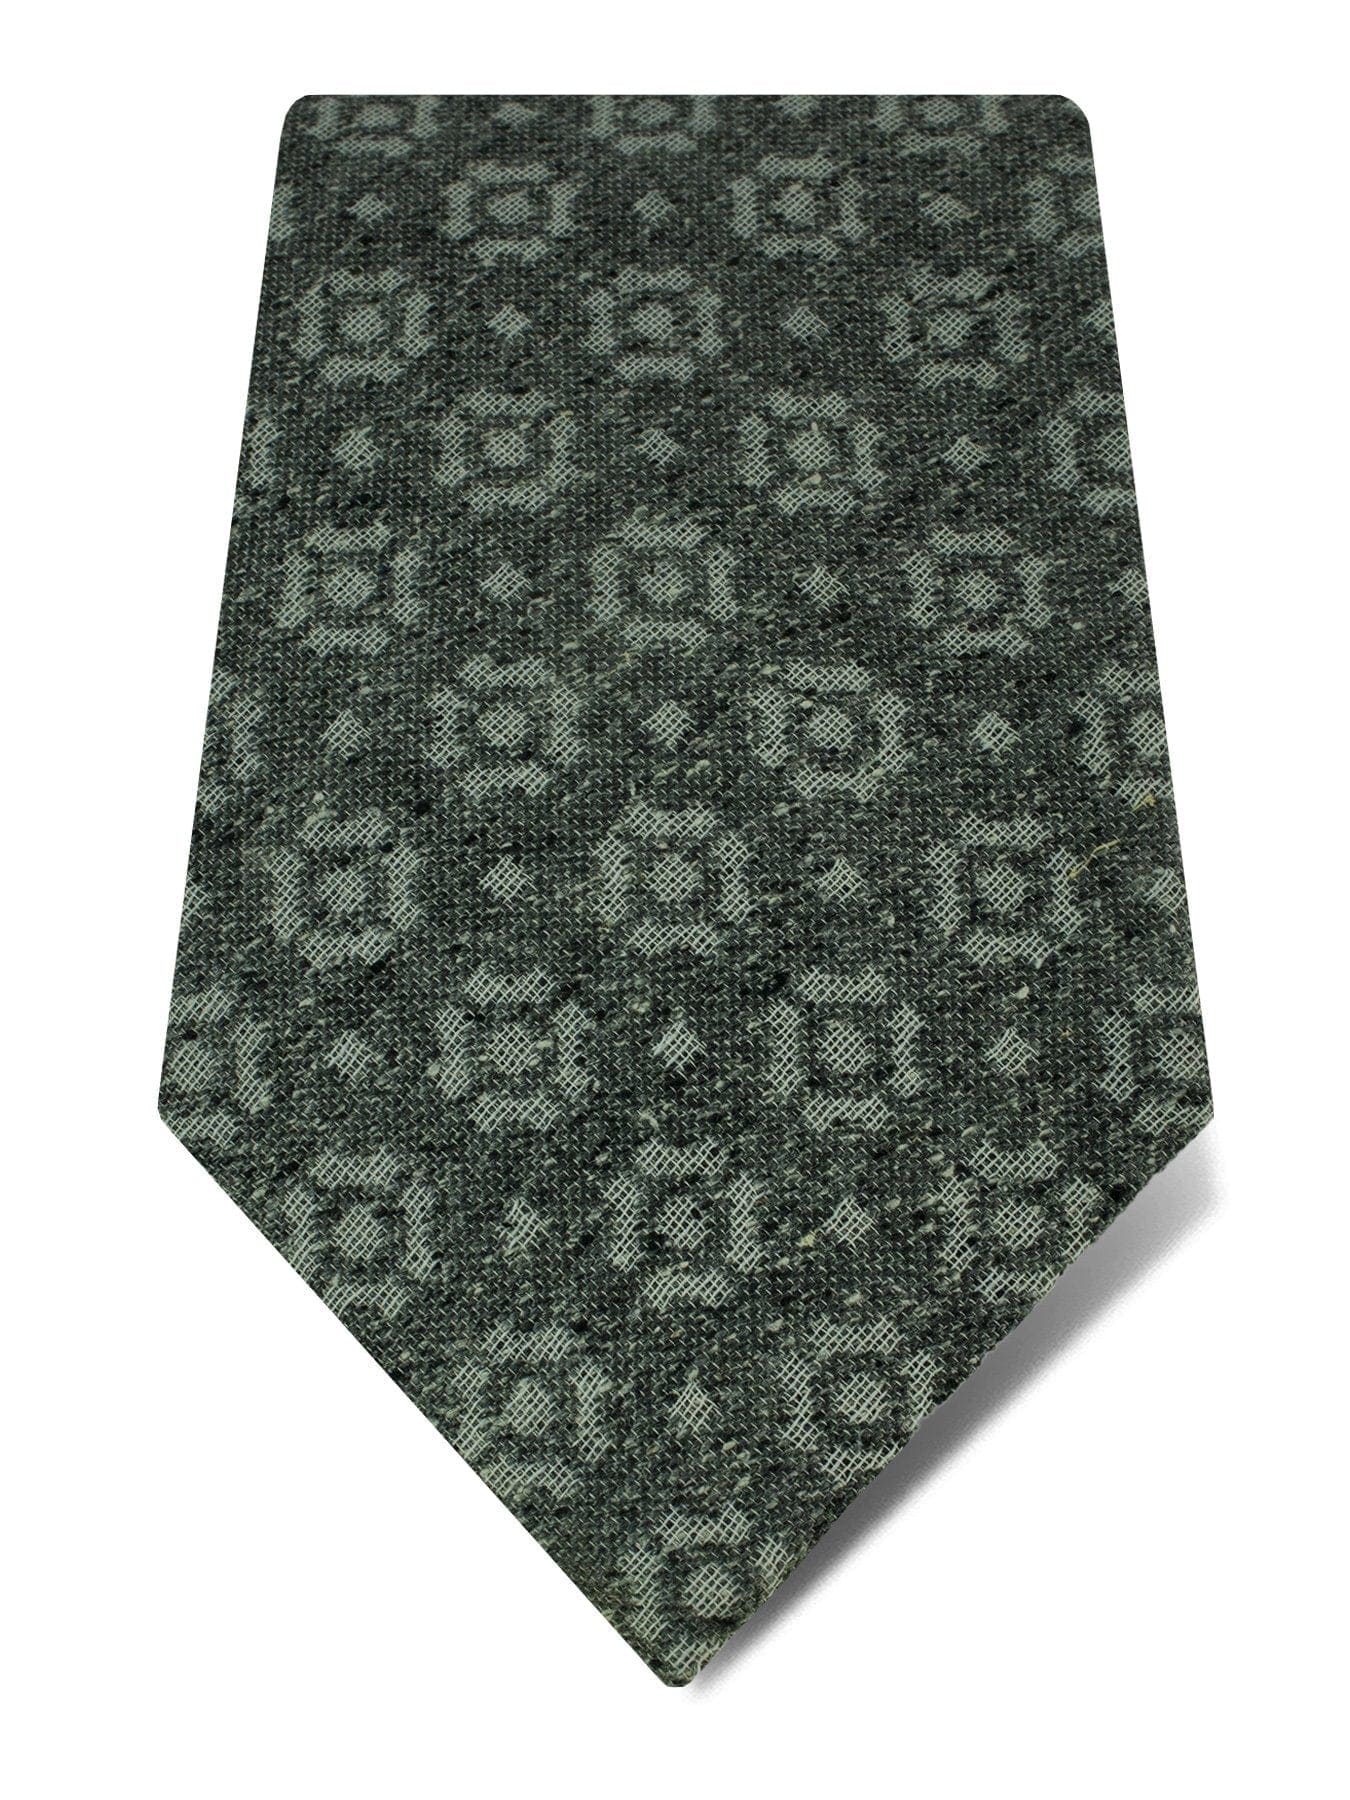 Grey Woven Cotton & Silk Tie with White Abstract Pattern